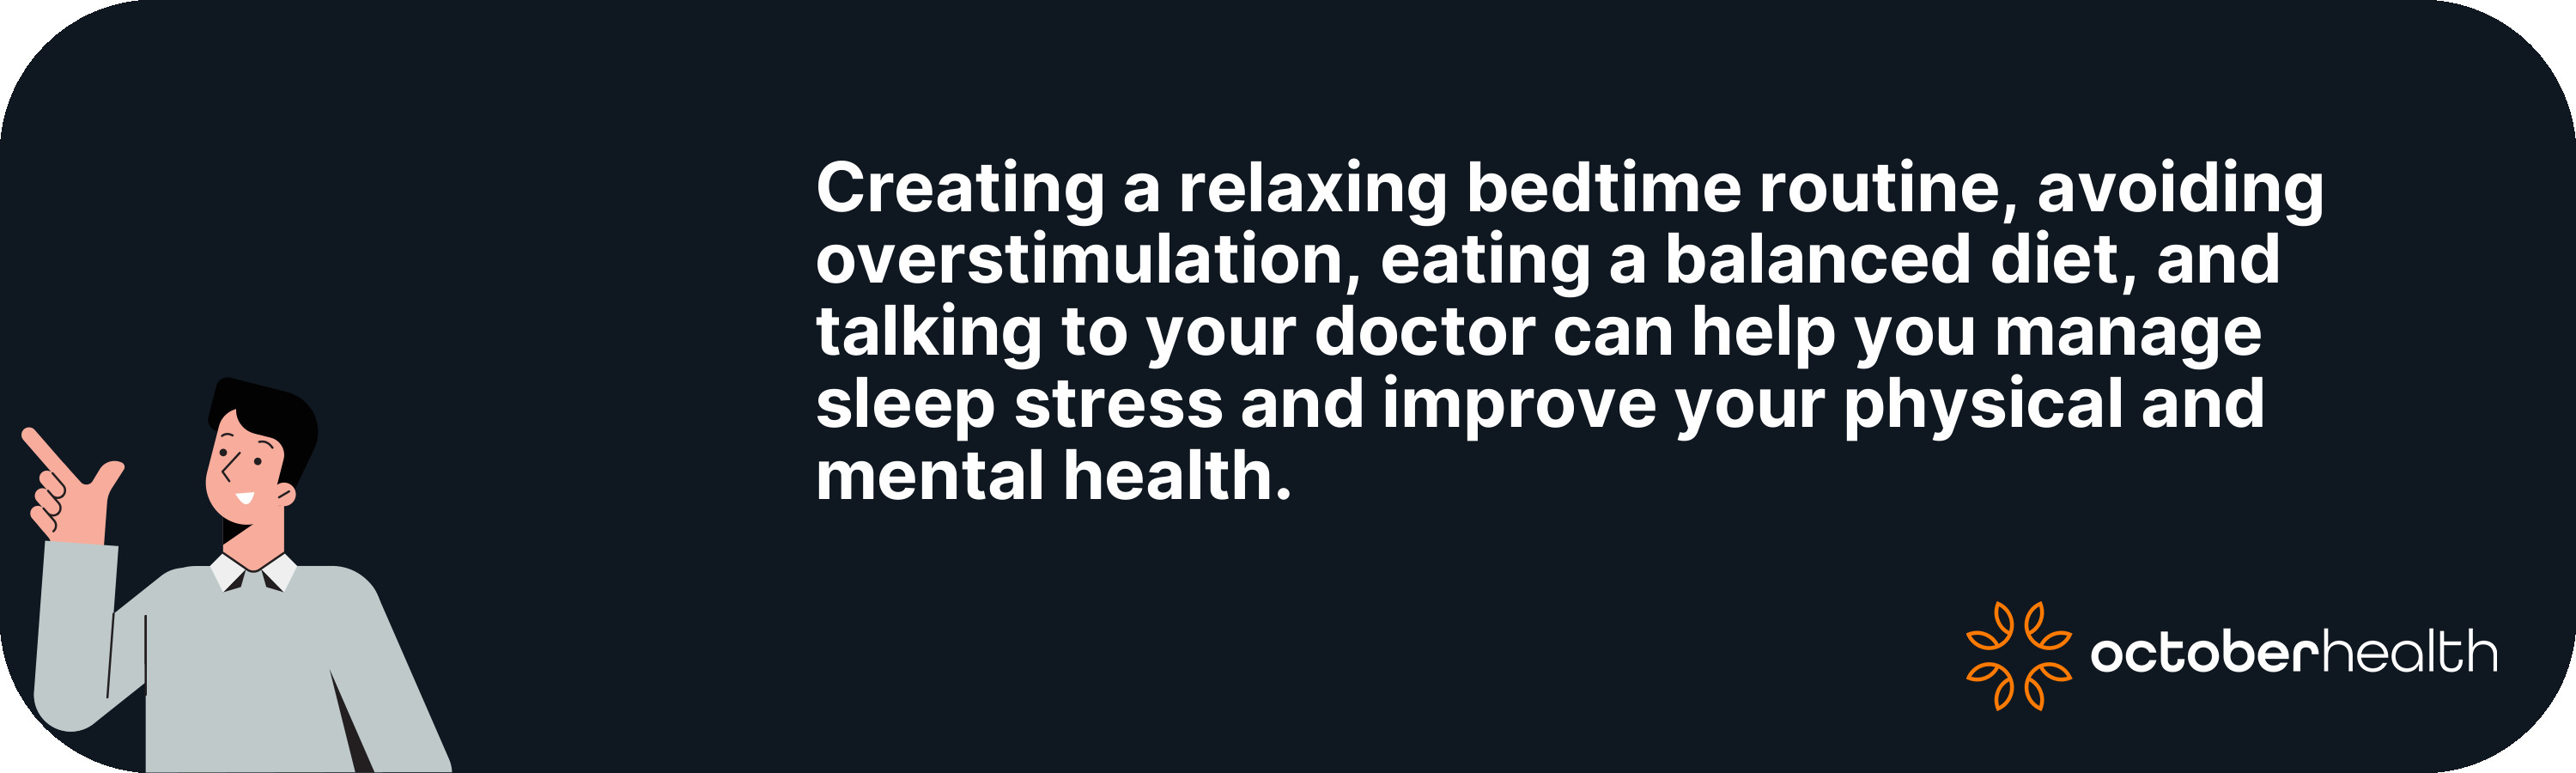 Creating a relaxing bedtime routine, avoiding...